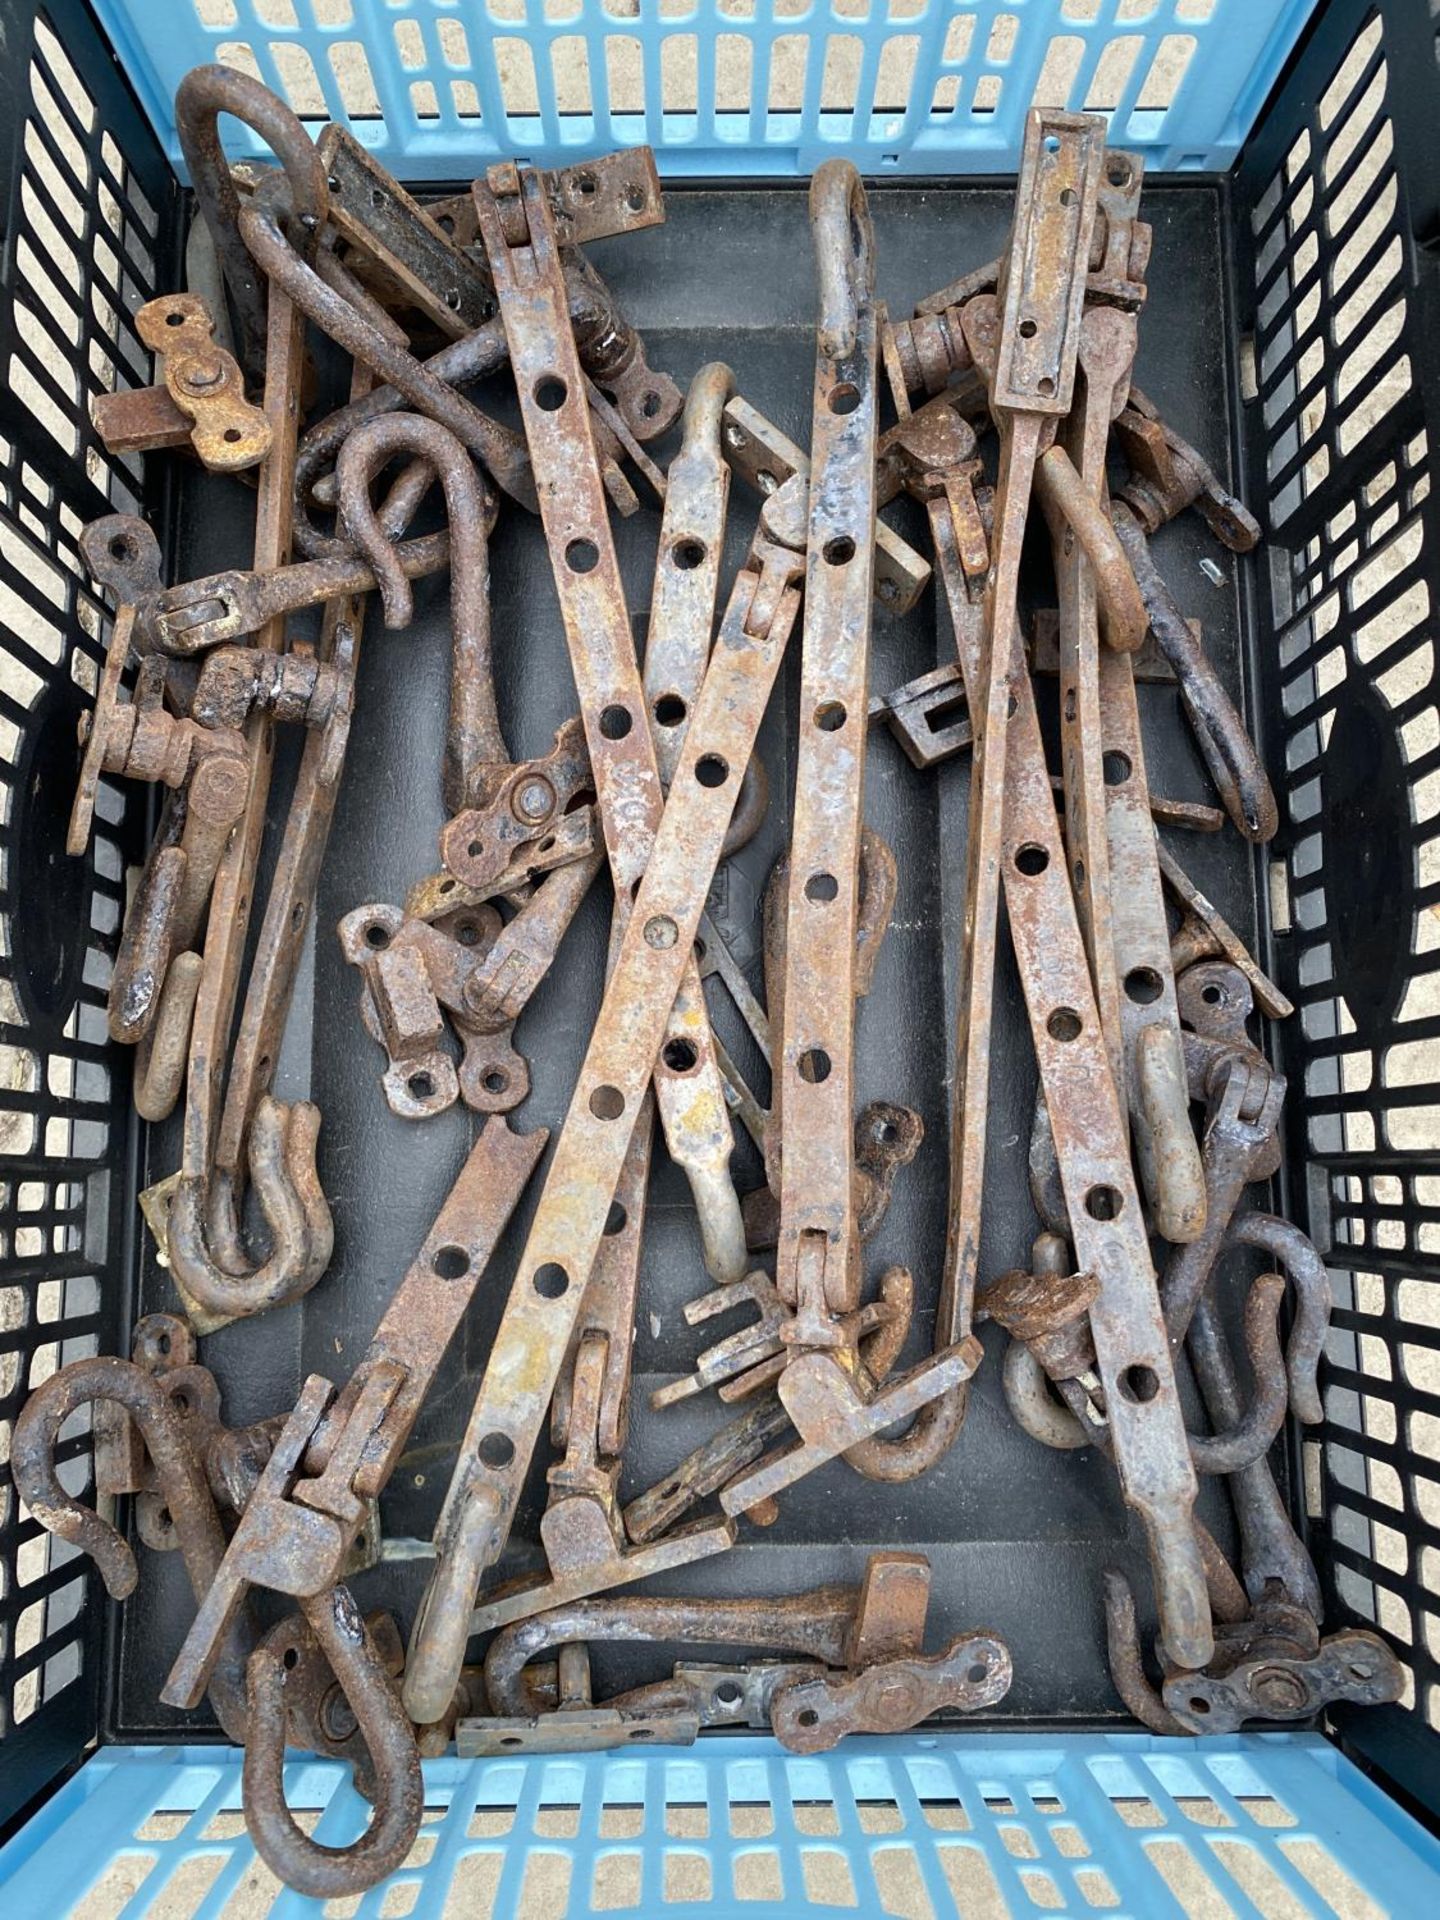 AN ASSORTMENT OF METAL WINDOW CATCHES - Image 2 of 2